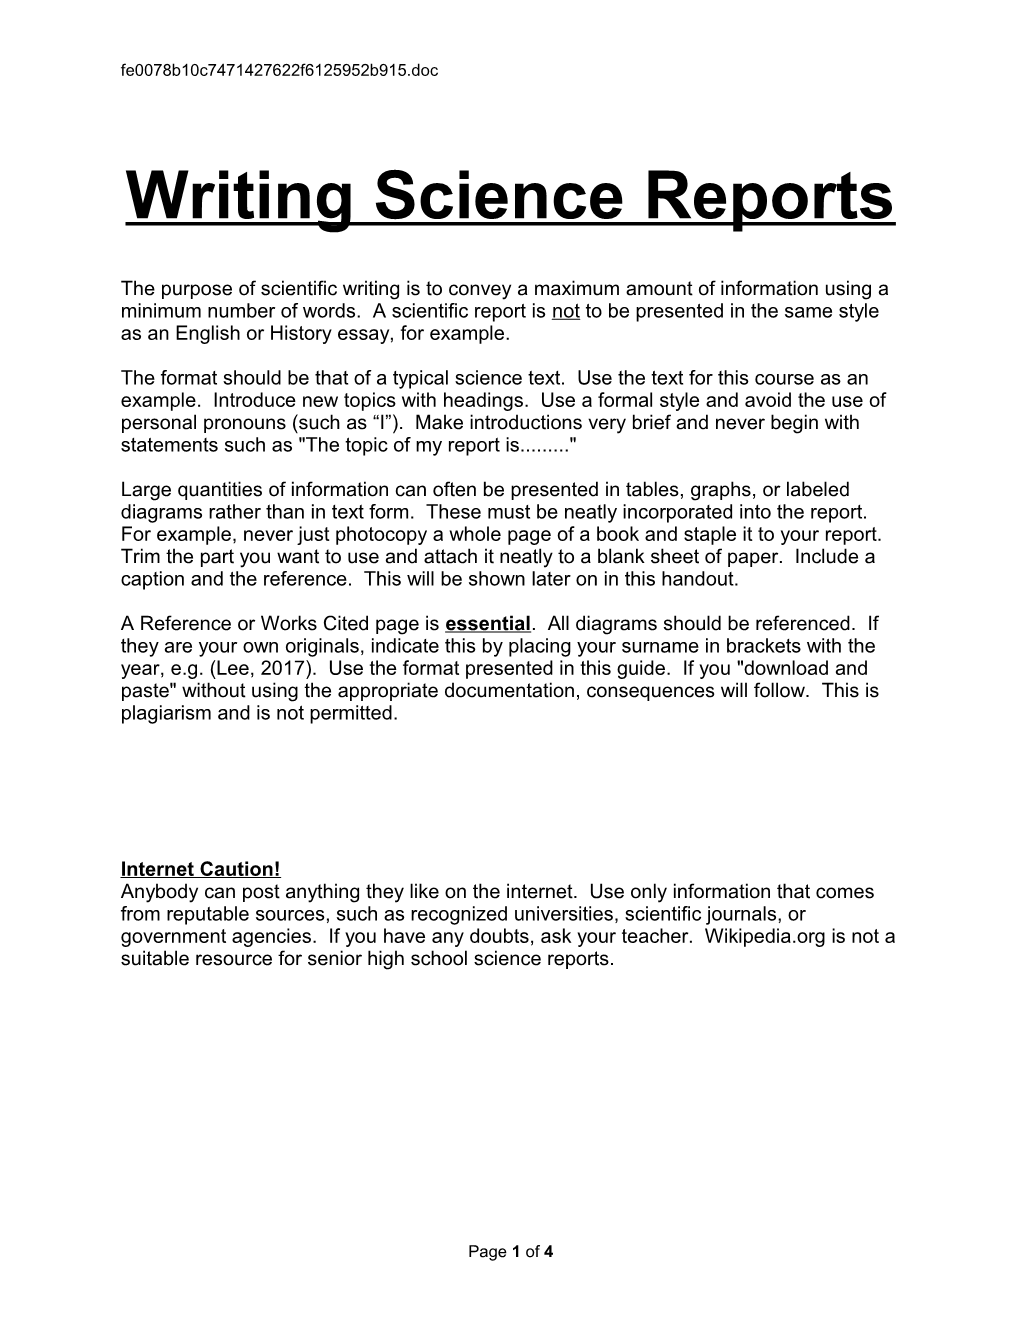 Writing Science Reports